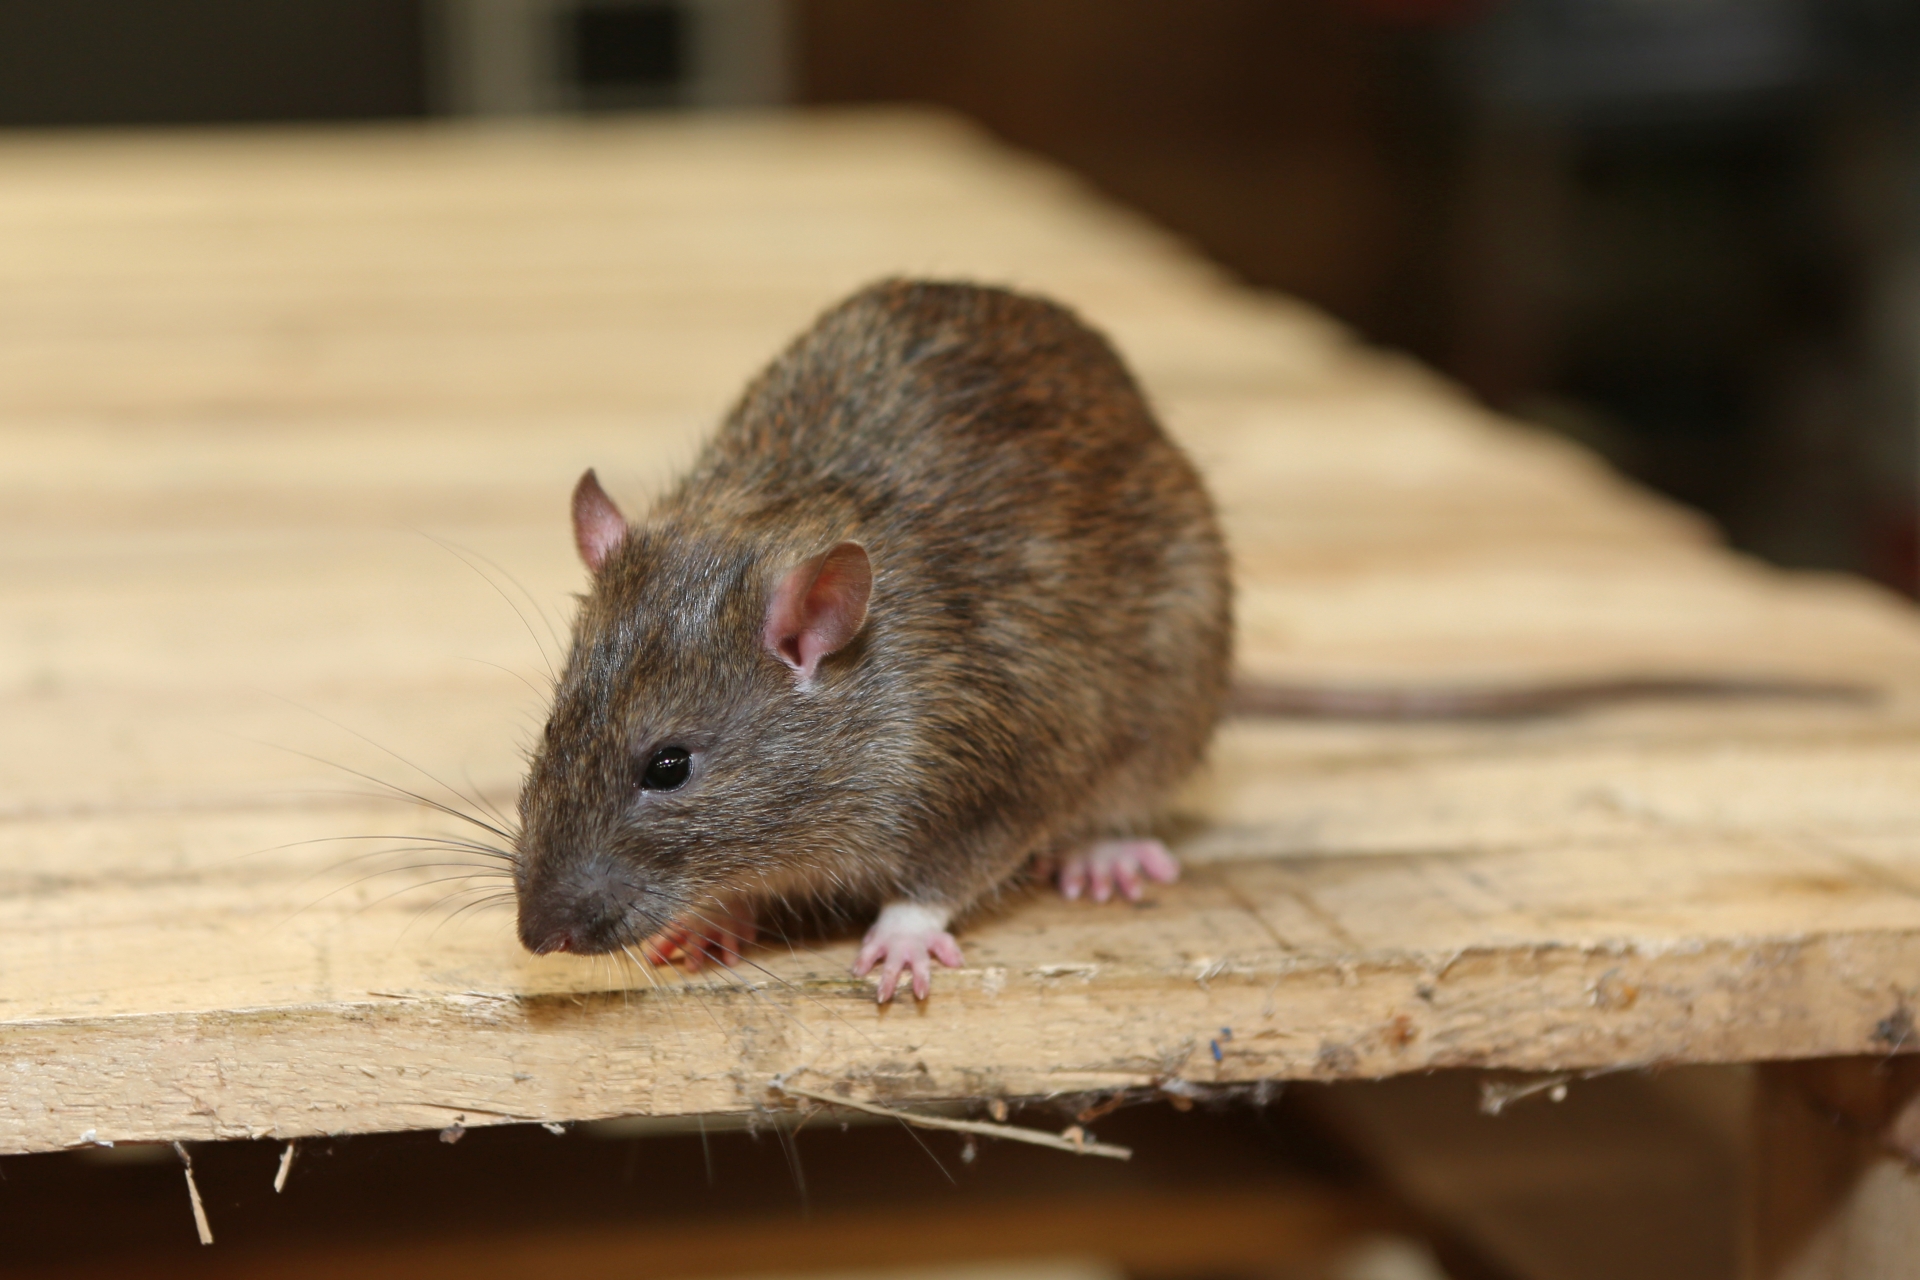 Rat extermination, Pest Control in Friern Barnet, New Southgate, N11. Call Now 020 8166 9746